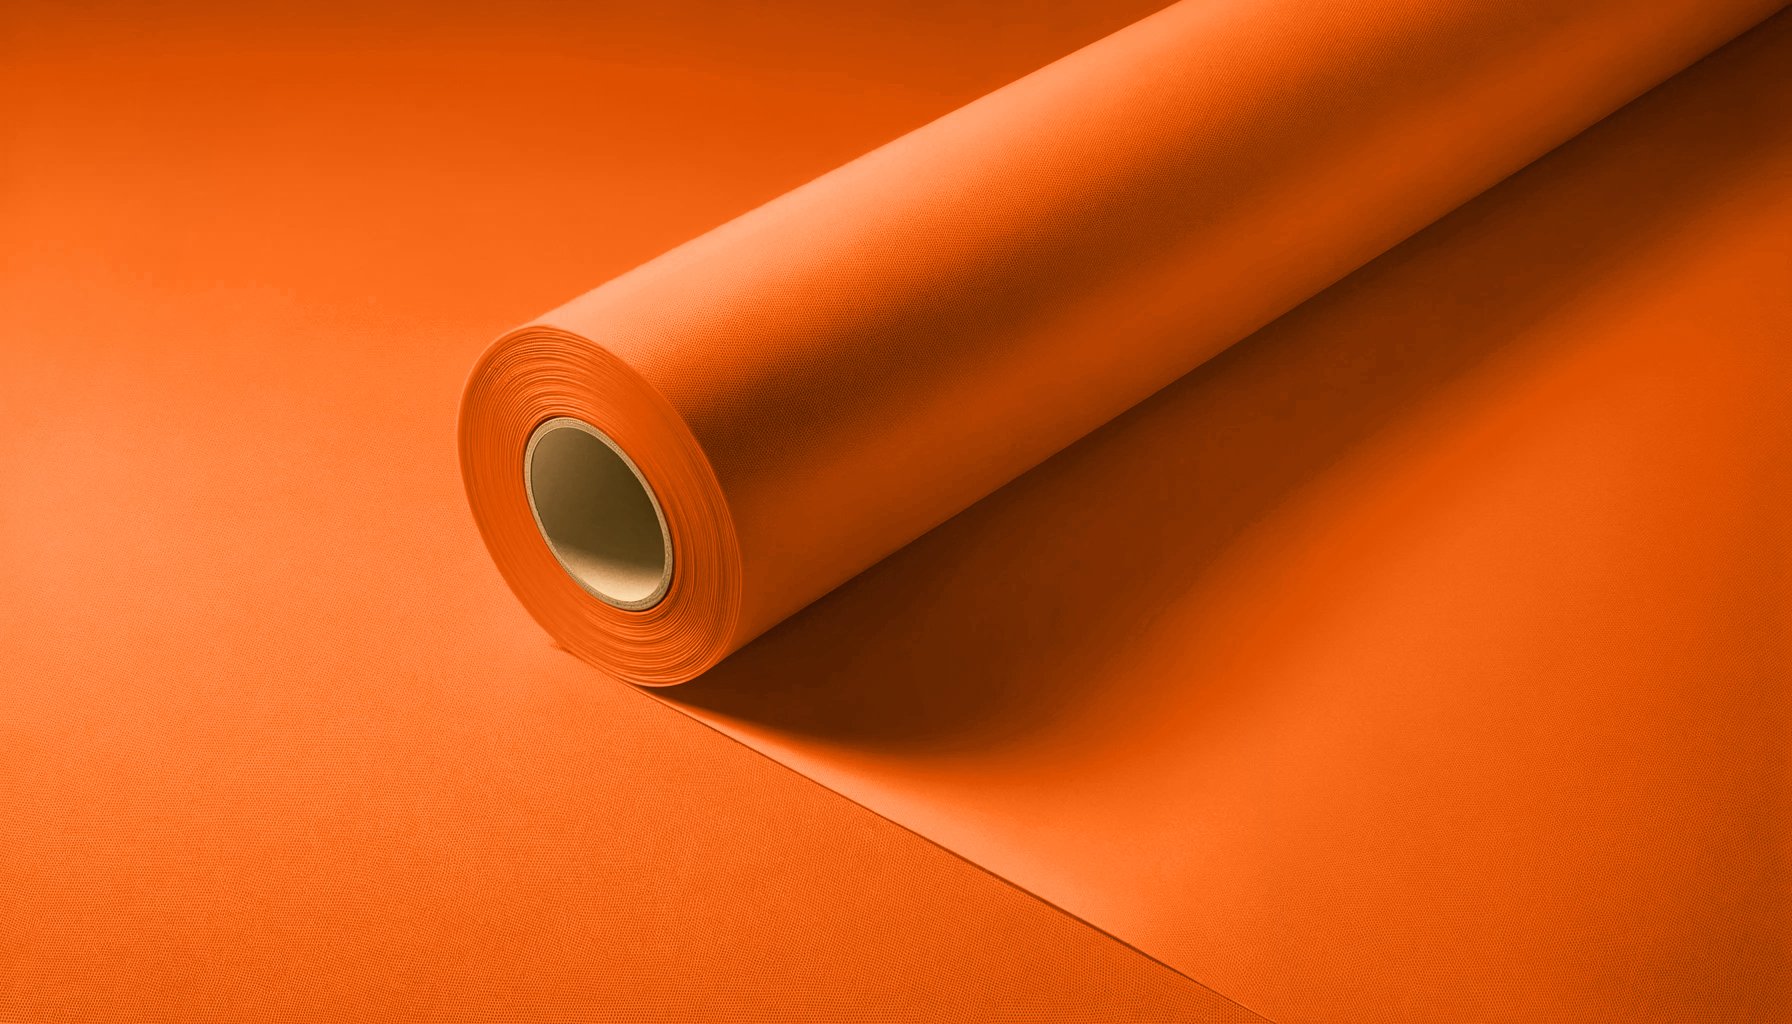 Peel & Stick Removable Re-usable Paint - Color RAL 2004 Pure Orange - offRAL™ - RALRAW LLC, USA